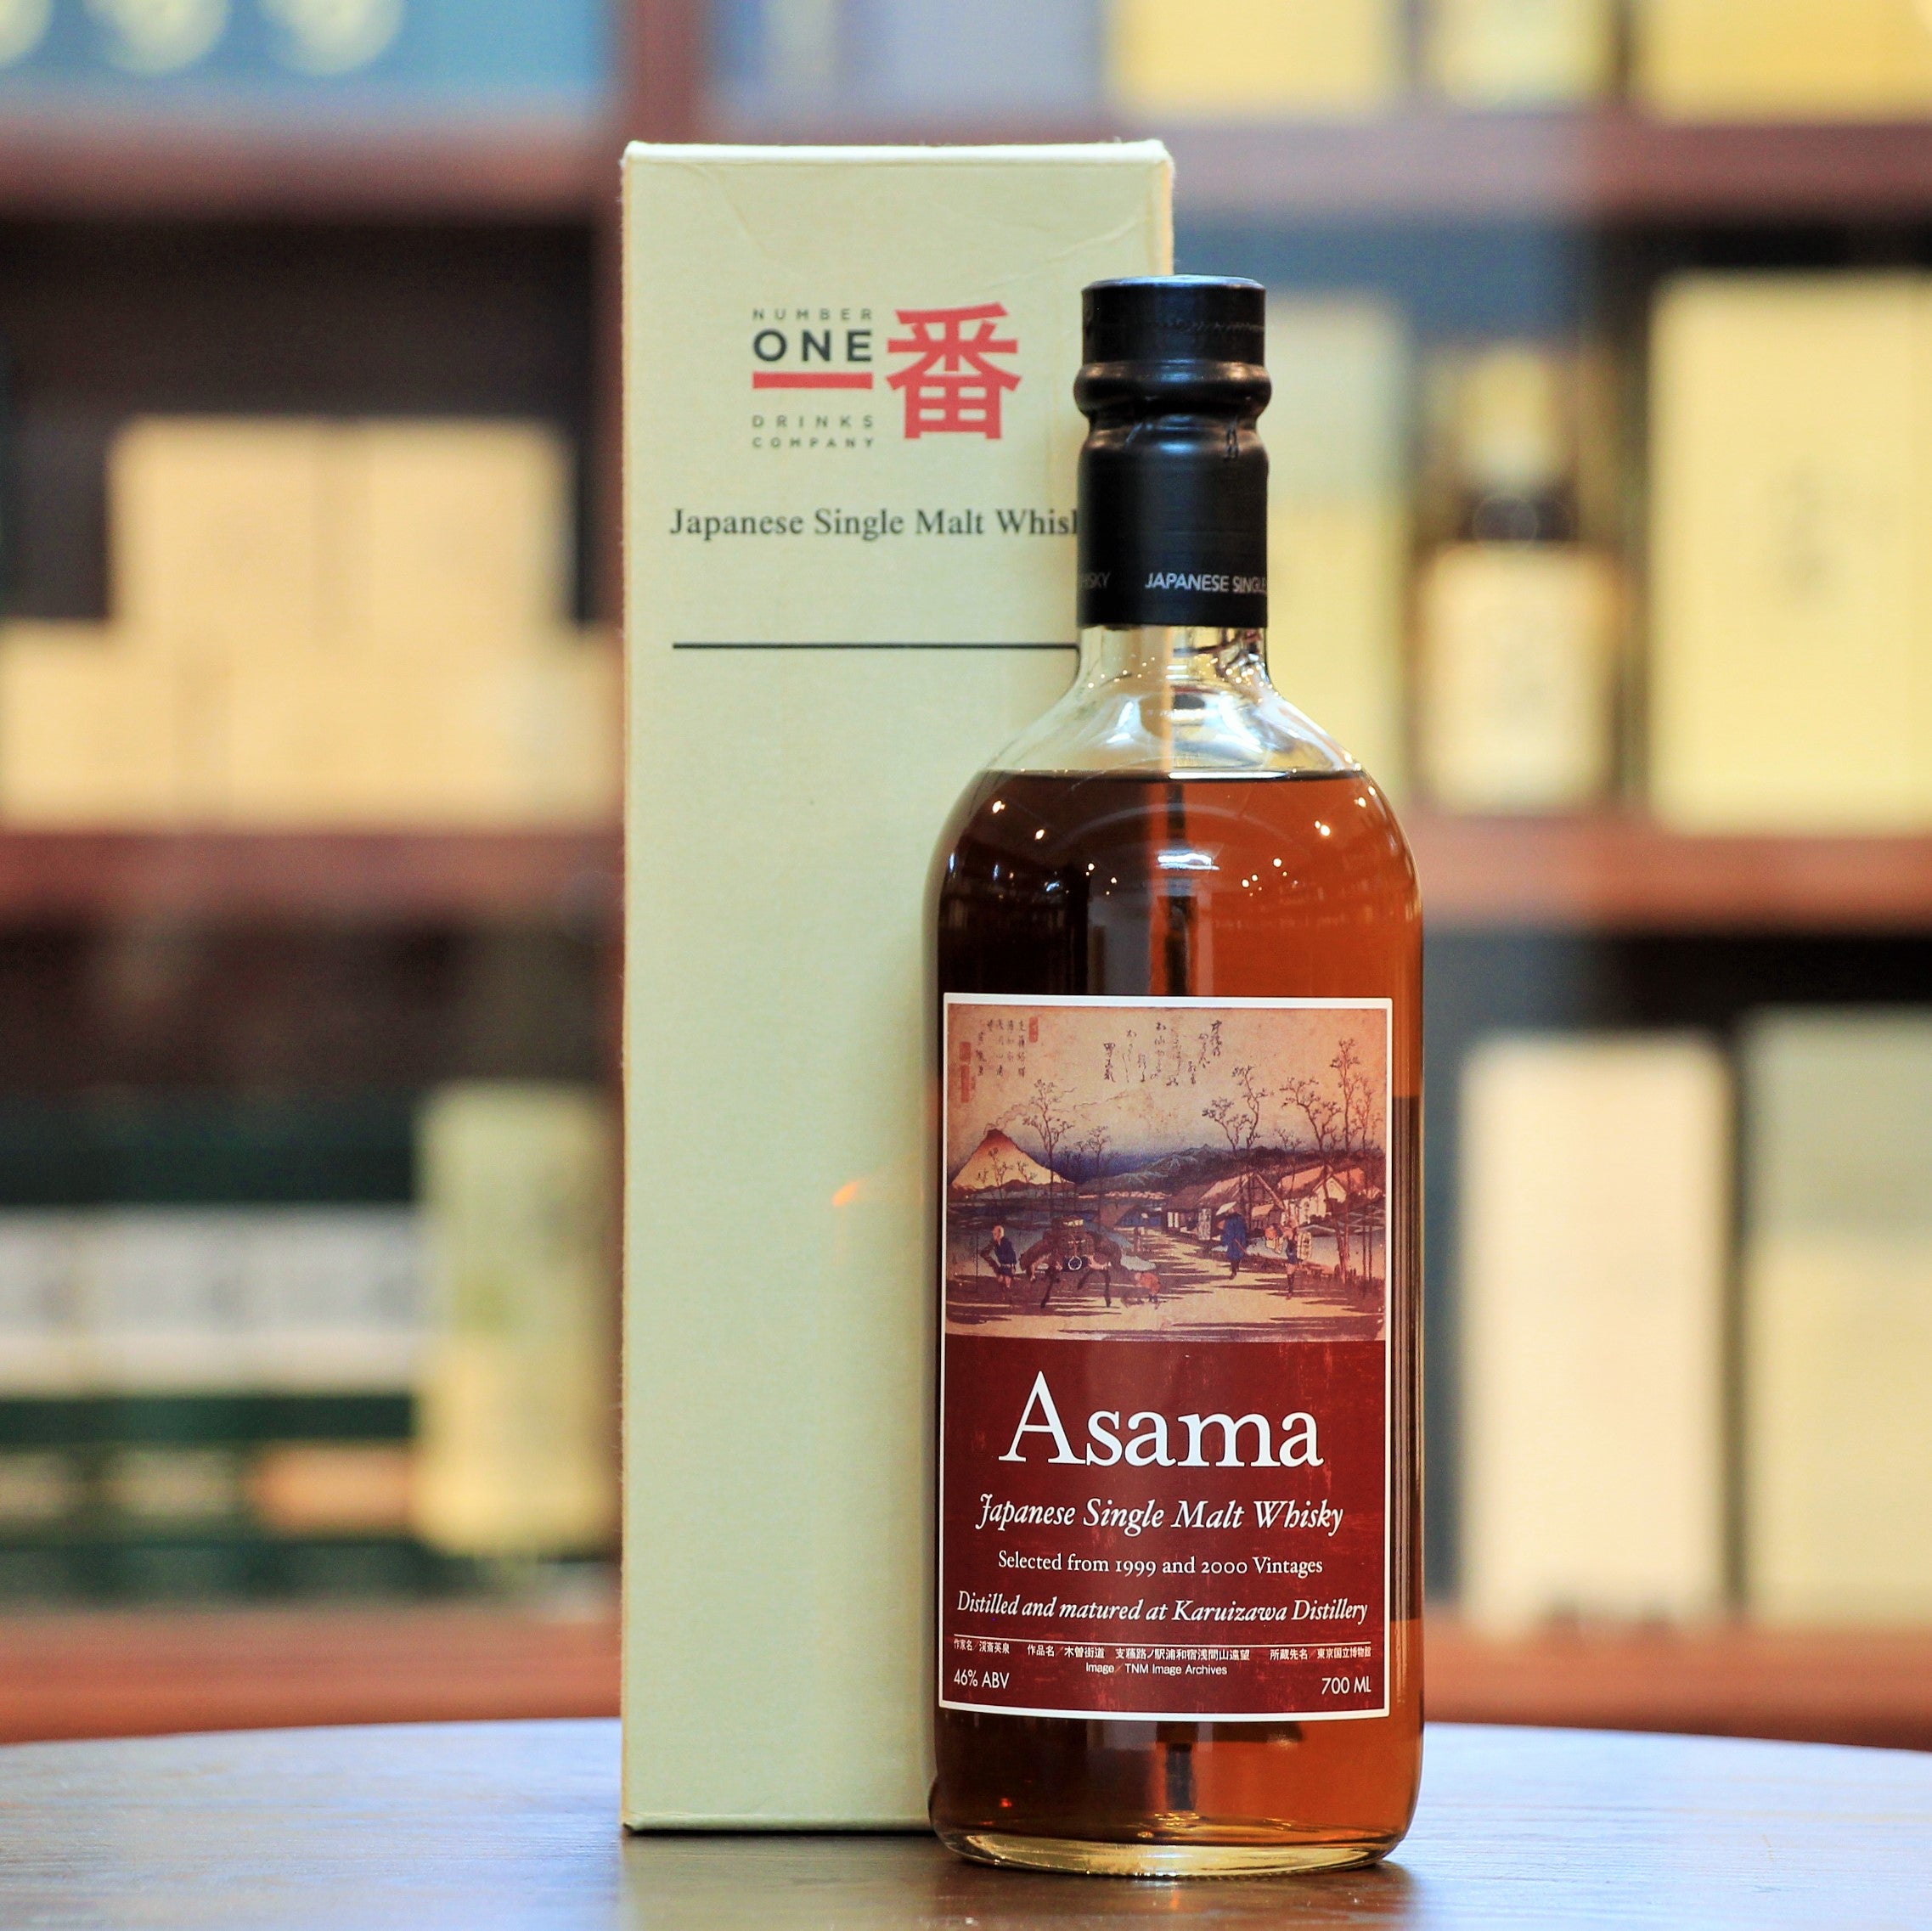 Karuizawa Asama Paper Label Vintage 1999-2000, Bottled in 2012,  this whisky includes the final vintages of Karuizawa in 1999-2000. Matured in European oak sherry casks.